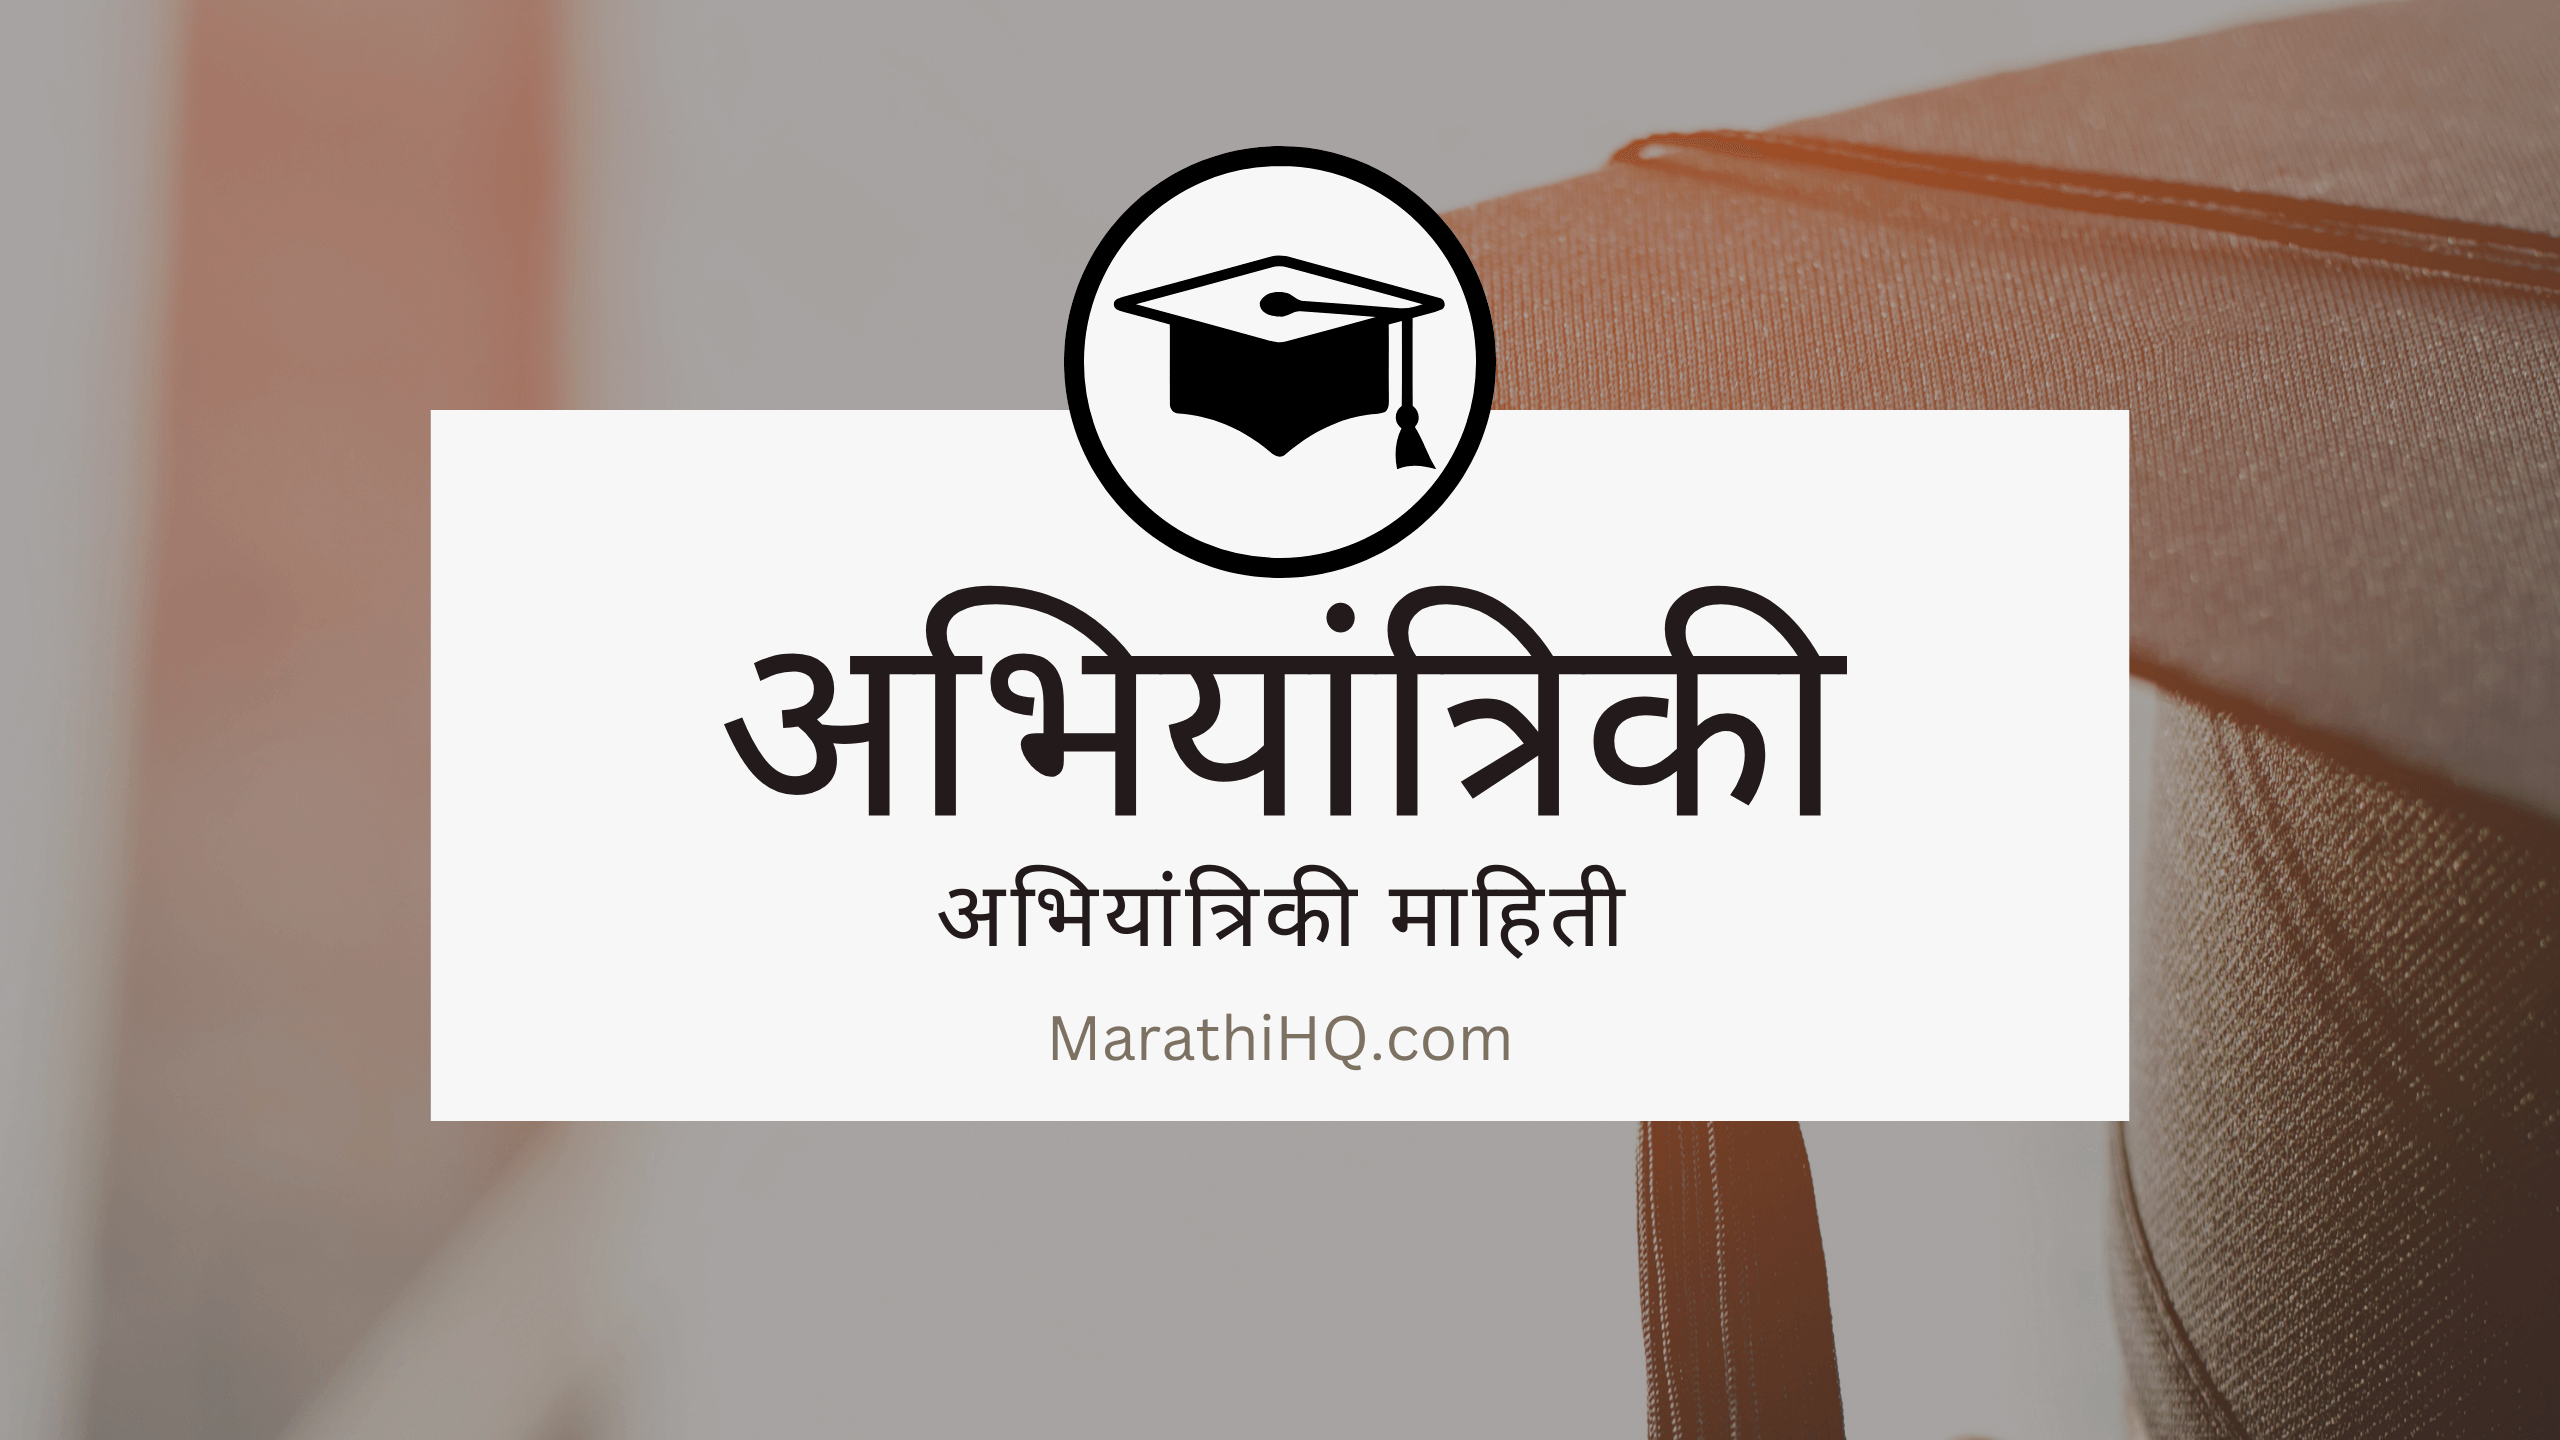 BE Course information in Marathi